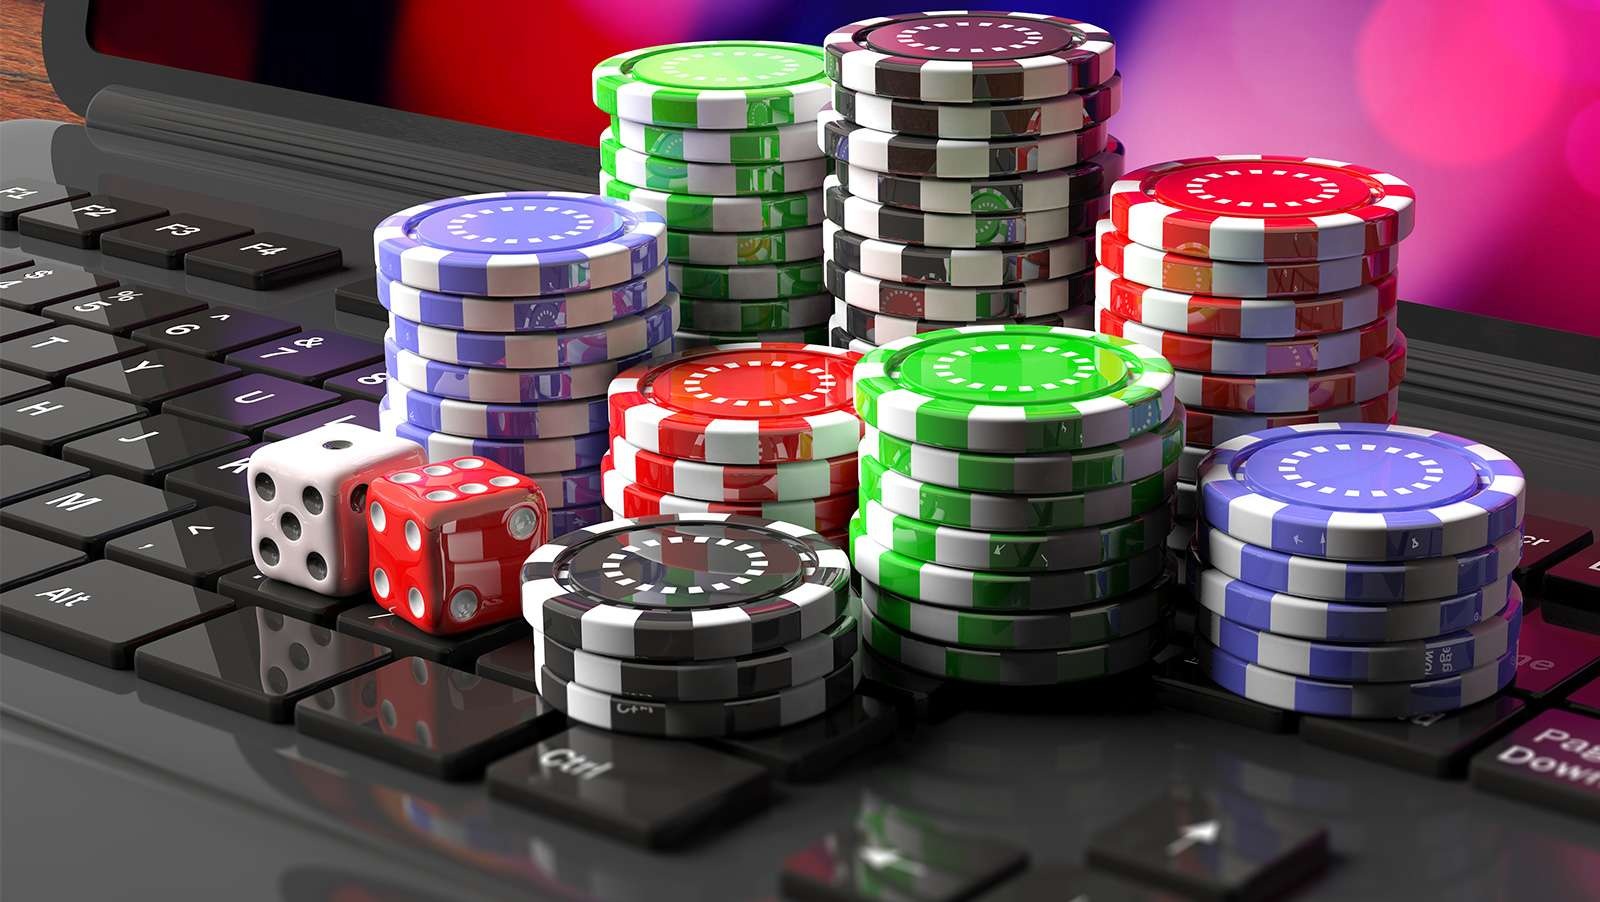 Internet casino terminology that you need to know